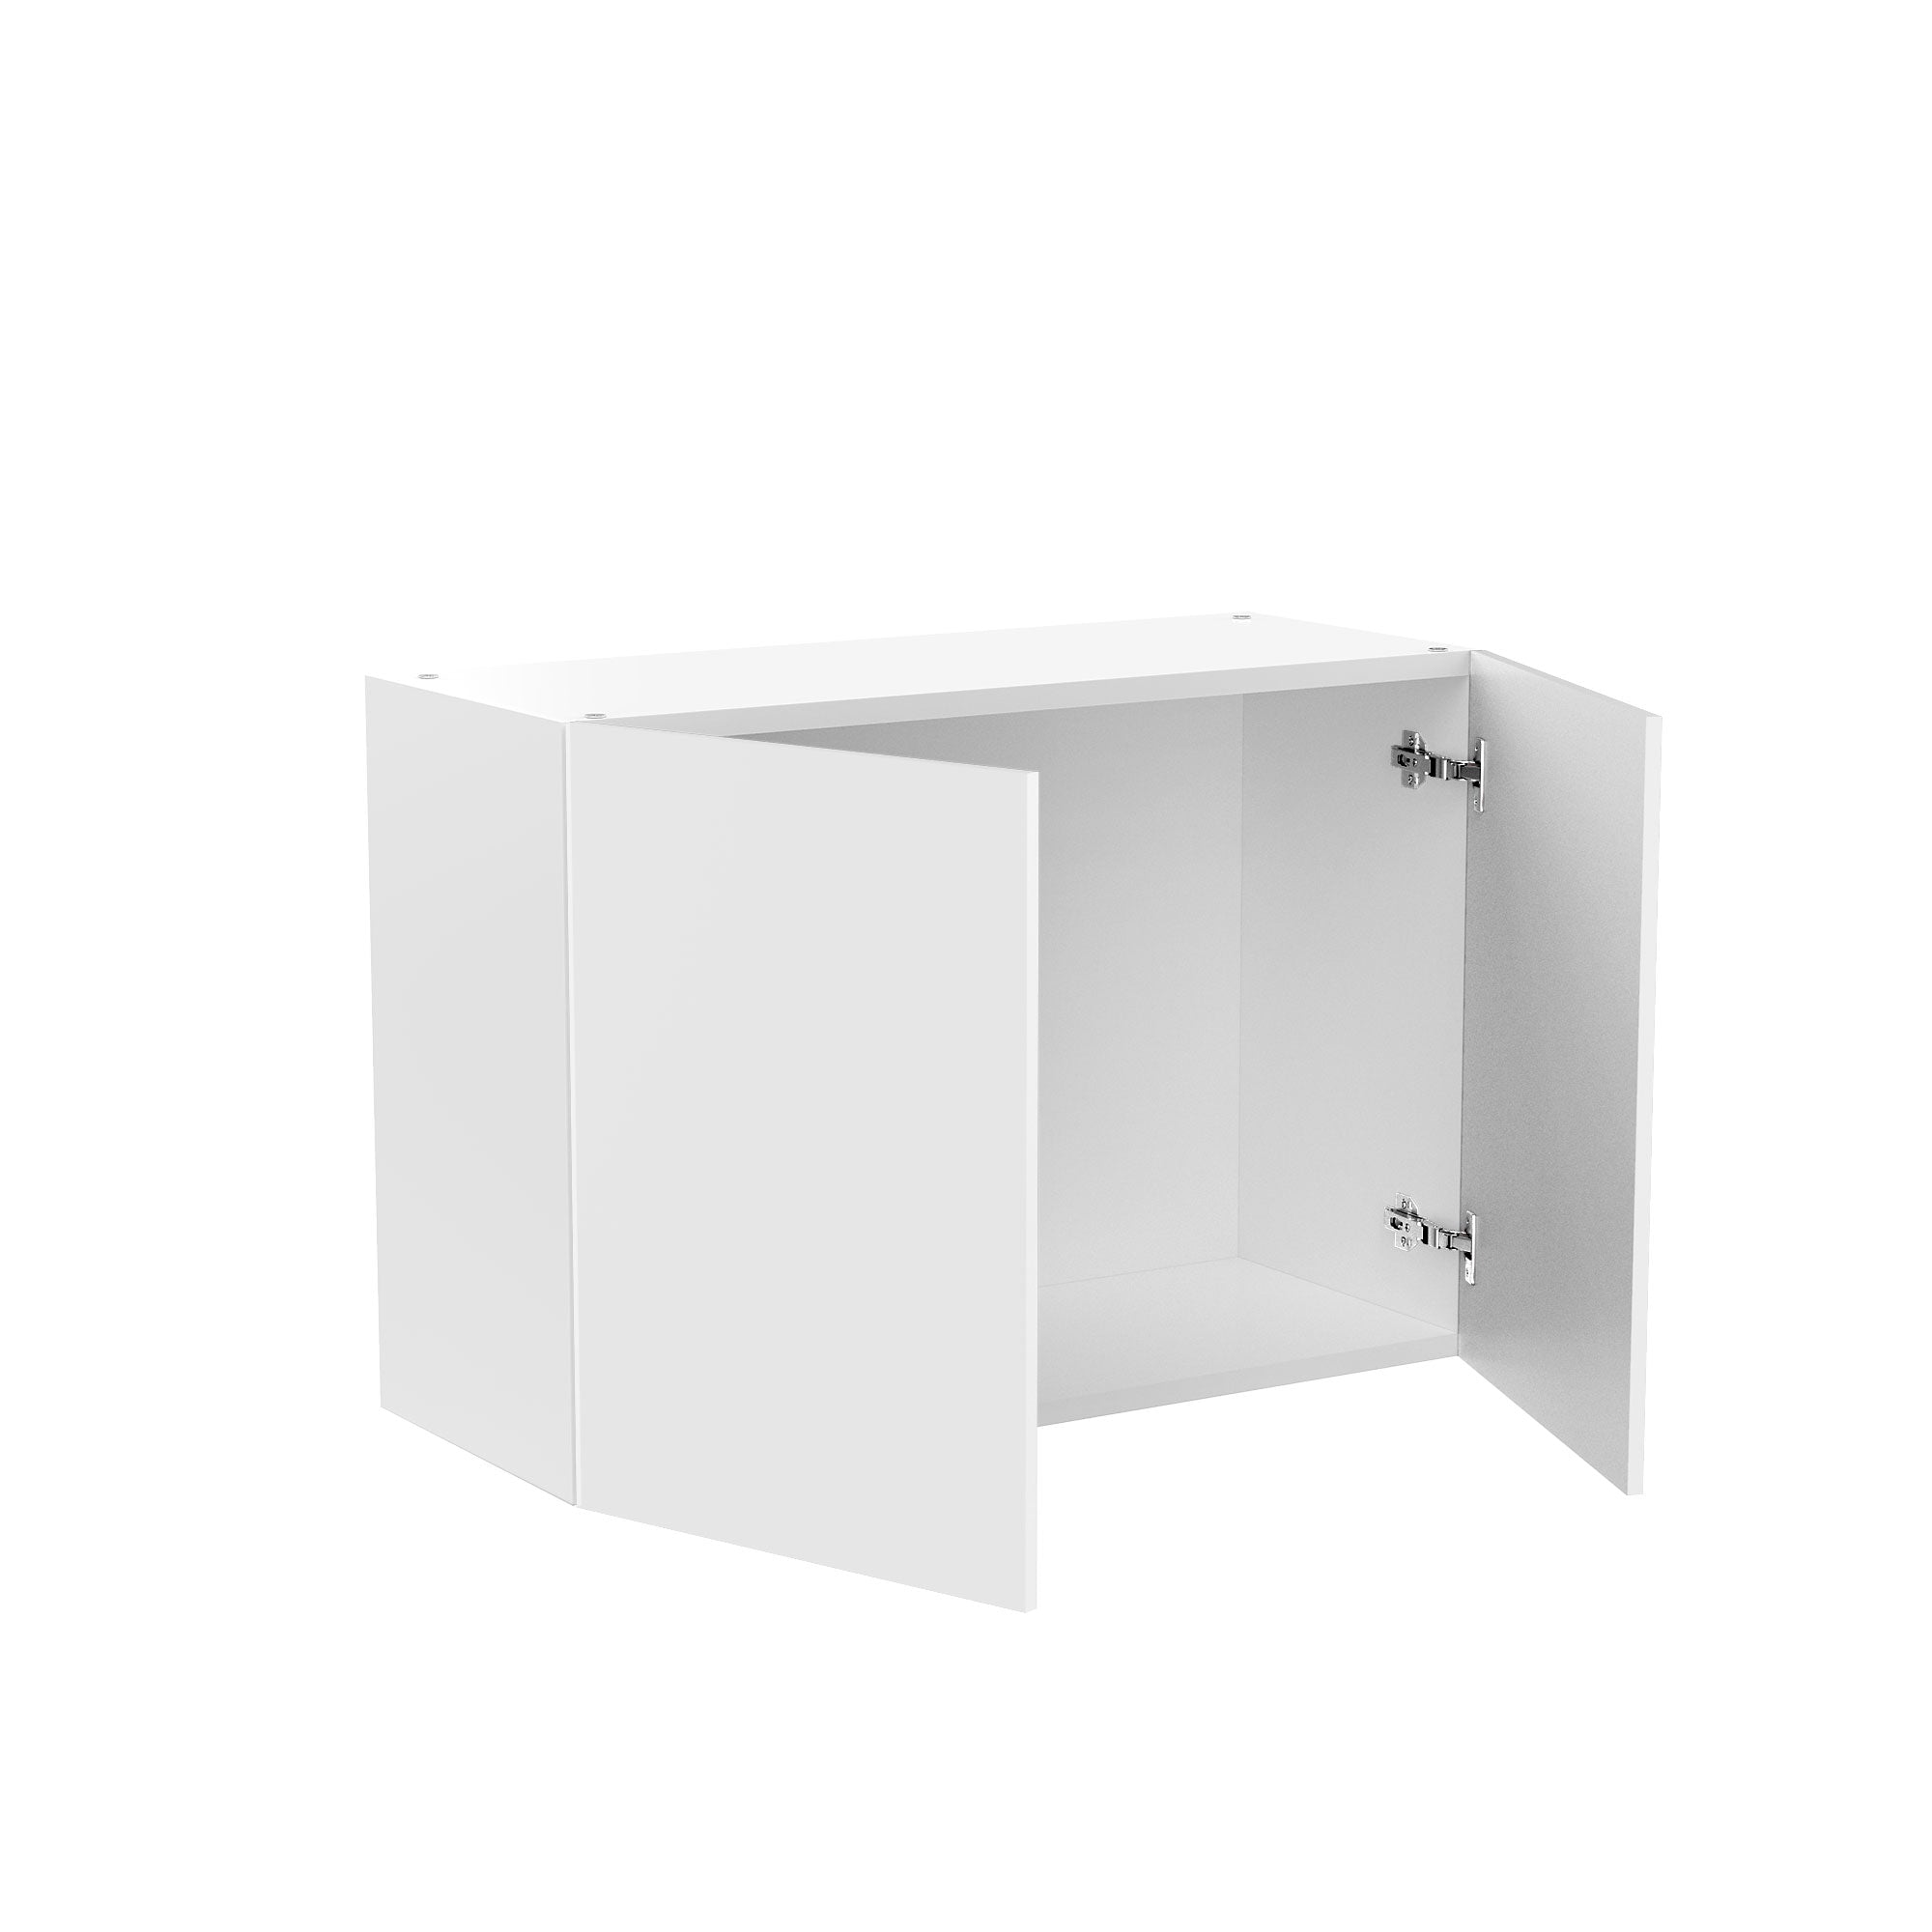 RTA - Glossy White - Double Door Wall Cabinets | 24"W x 18"H x 12"D